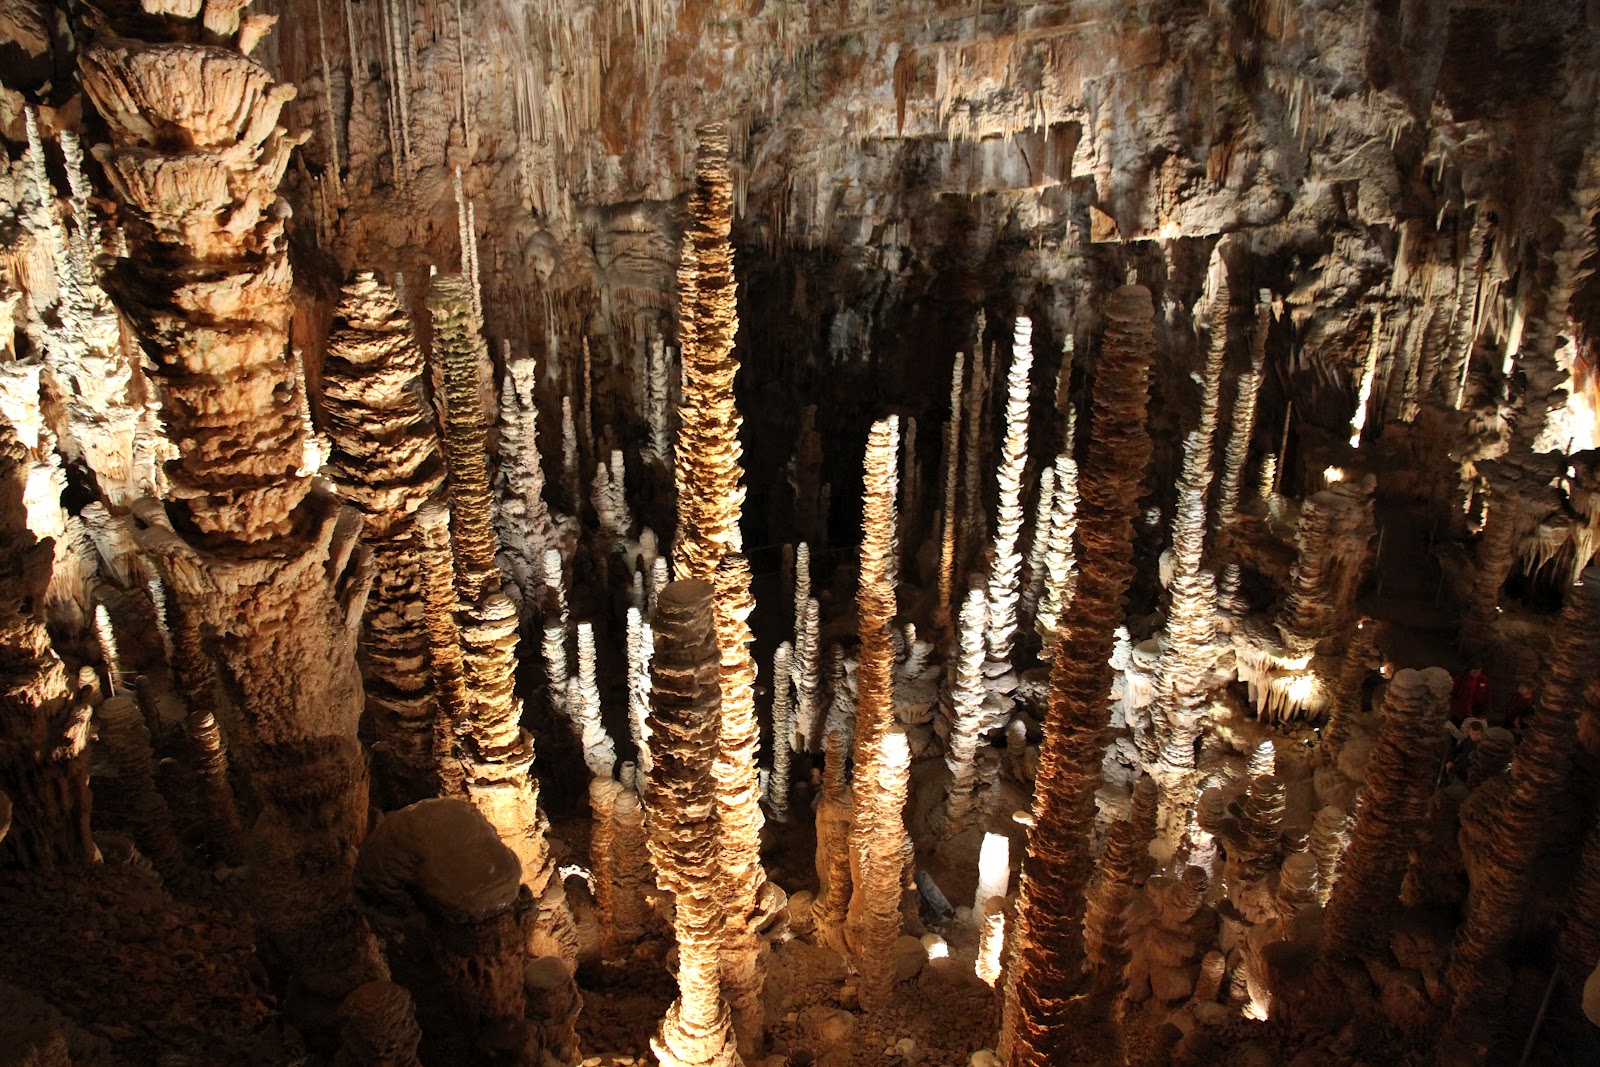 Aven Armand France- If you dare to venture 100 meters underground, the Aven Armand will make it worth your while. It boasts over 400 unique types of stalagmites, including the largest one known in the world, which stands at nearly 100 feet tall.